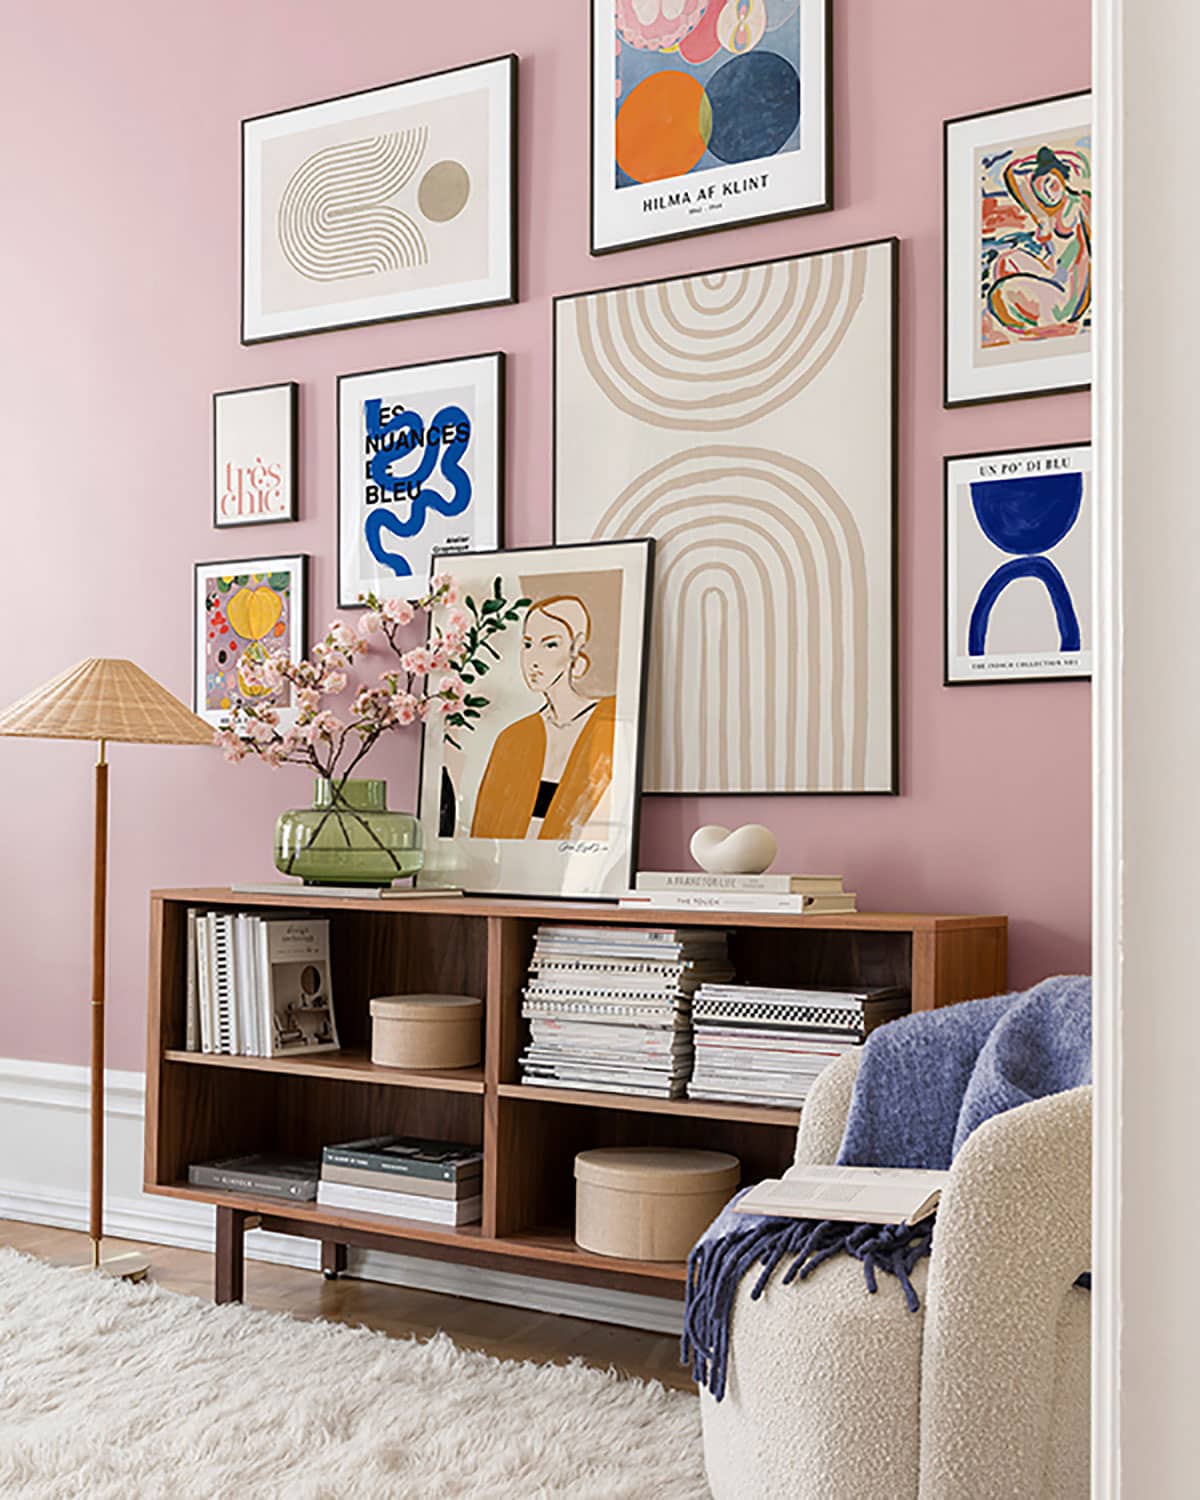 Affordable gallery wall eclectic modern decor style